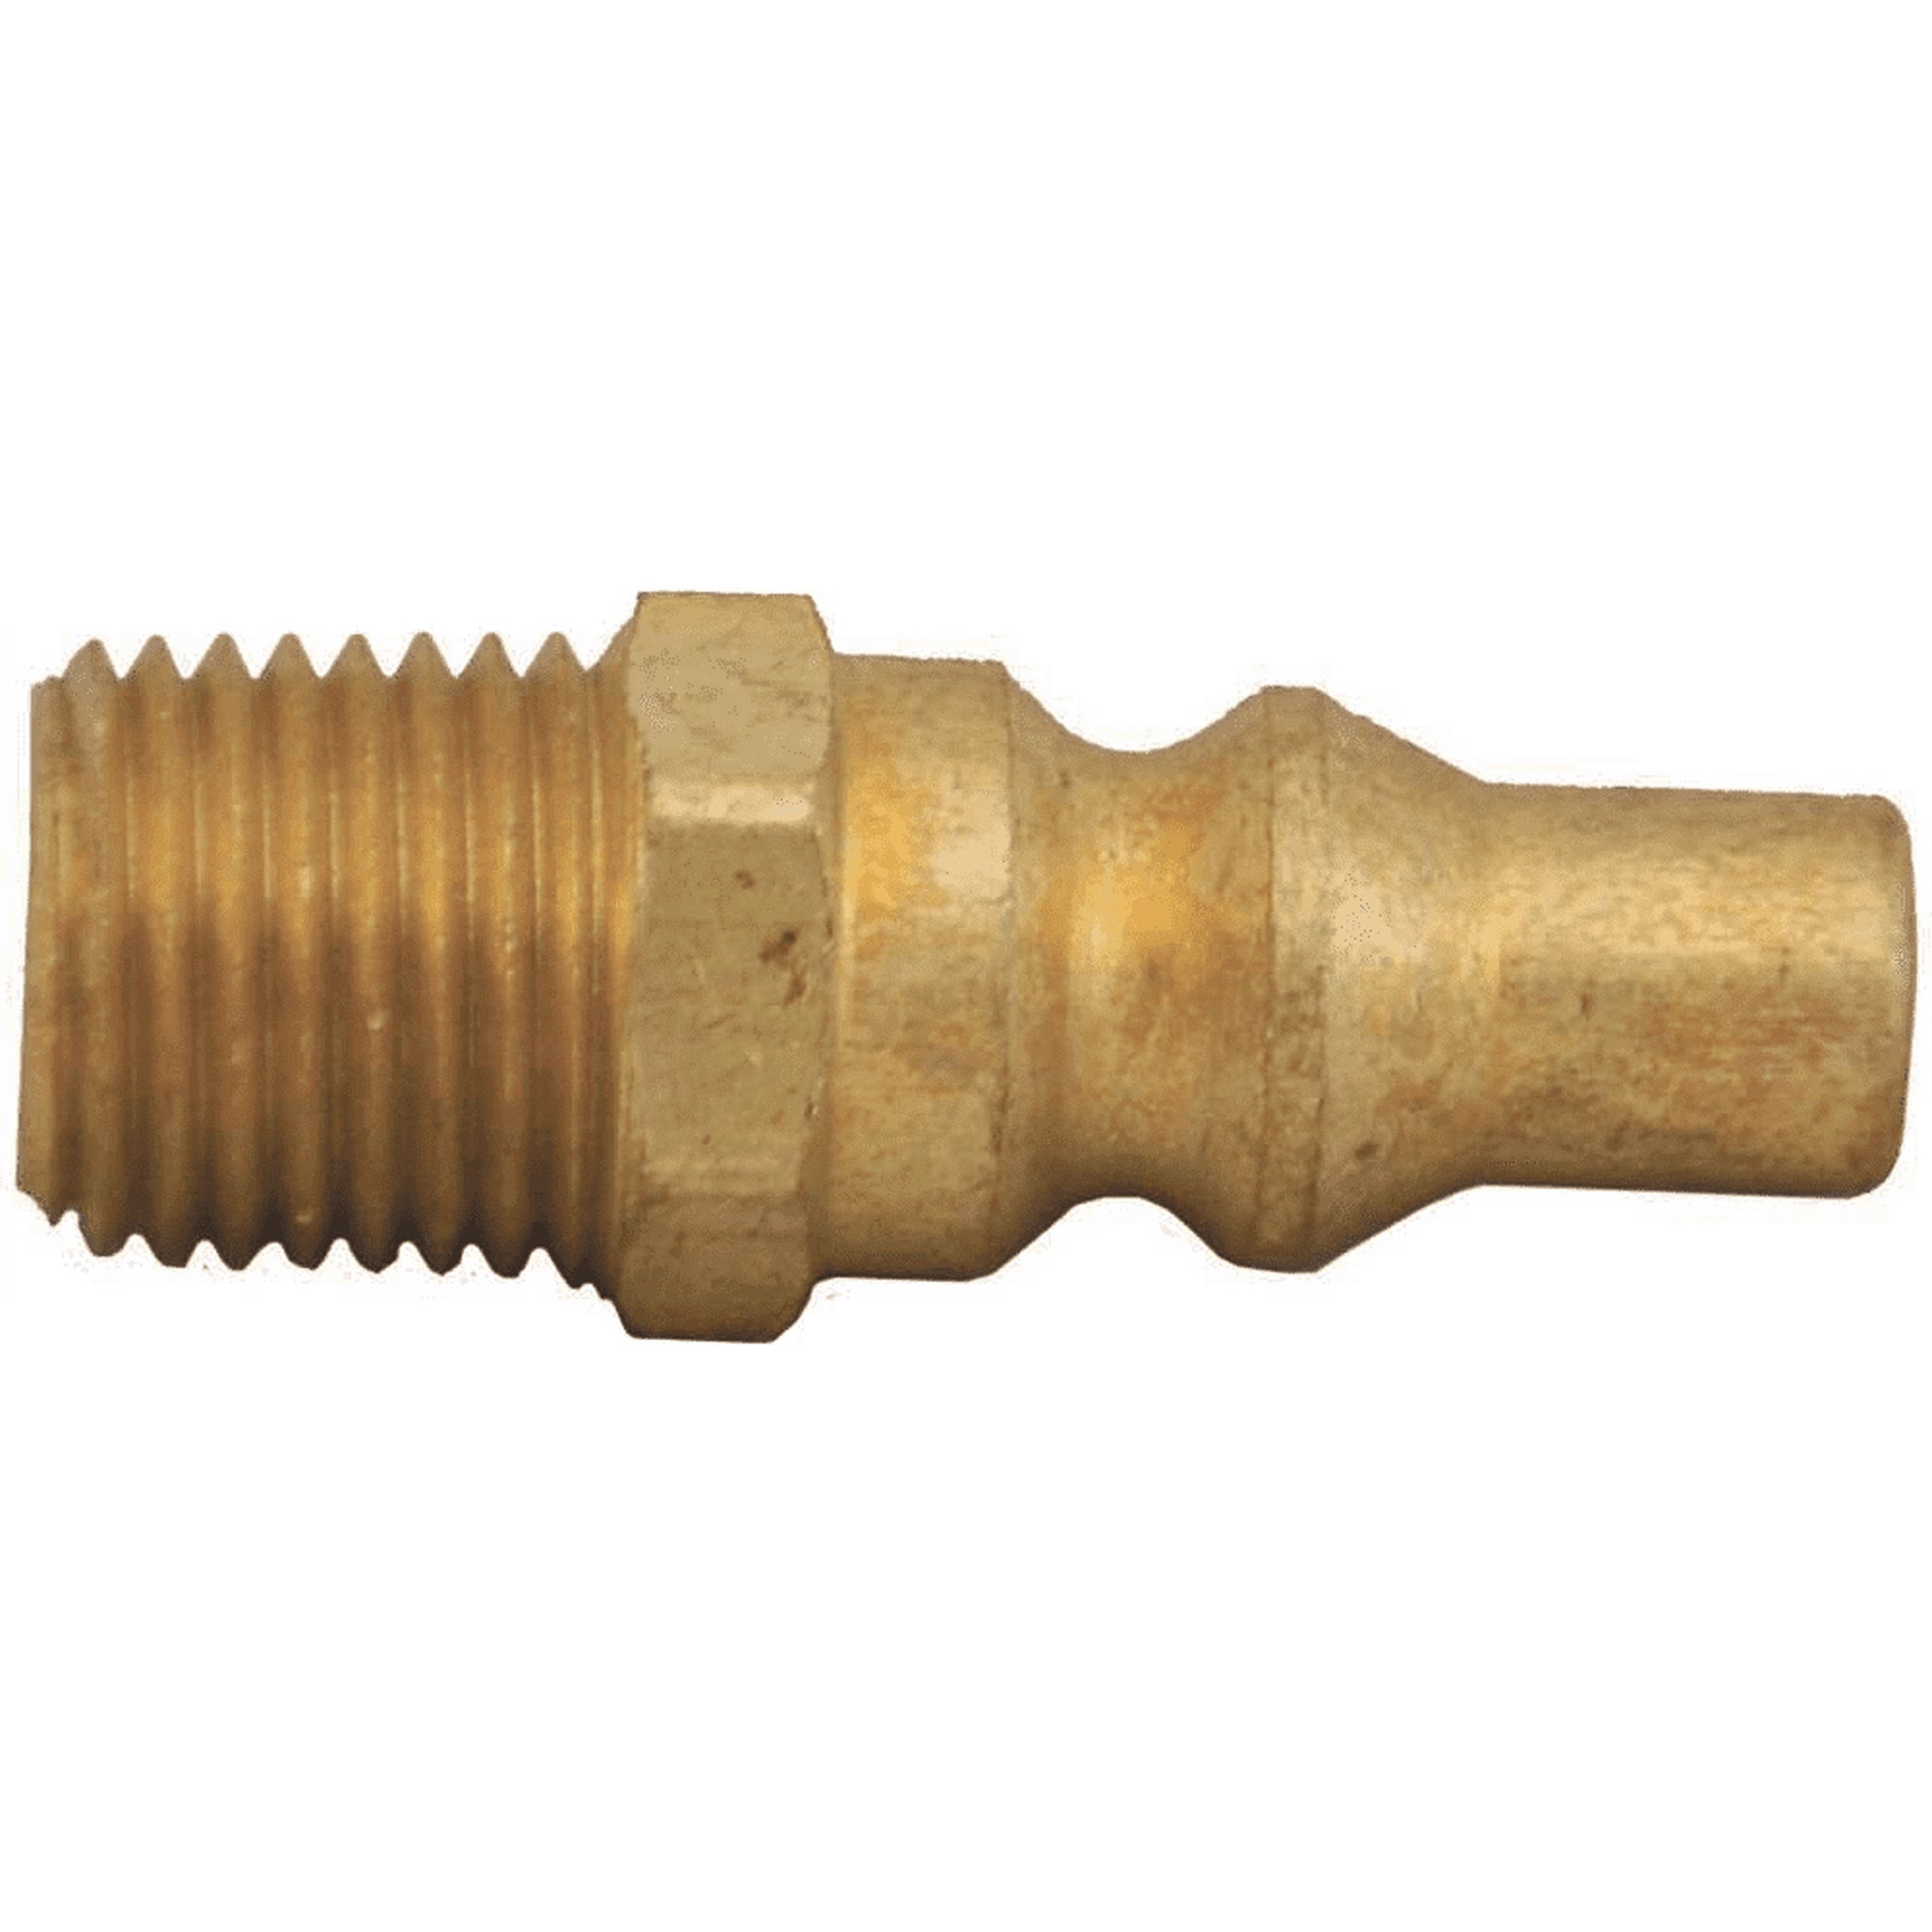 Marshall Excelsior ME-GMC4-02 Quick Disconnect Fitting Full Flow Male Plug - QD 1/4" MPT Nipple